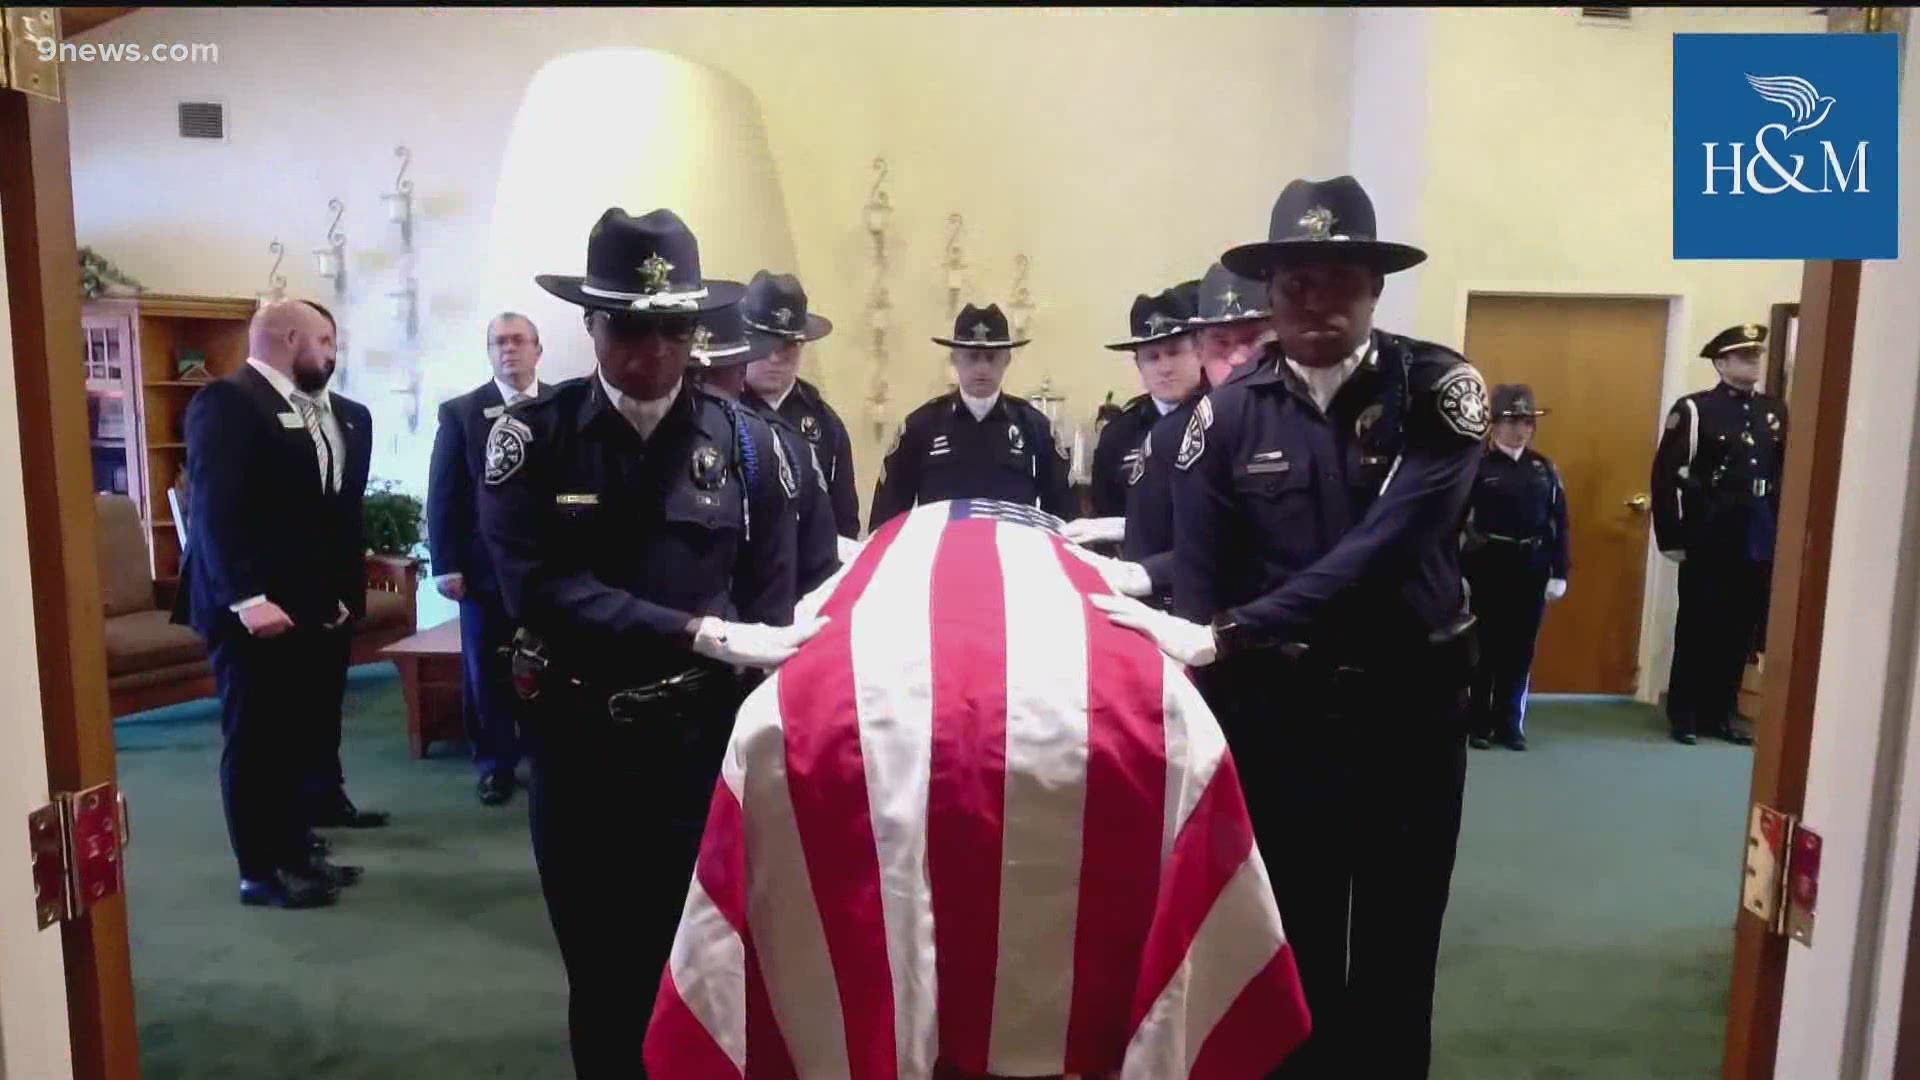 Deputy James Herrera died at age 51 with his family by his side. A celebration of life was held Saturday morning.